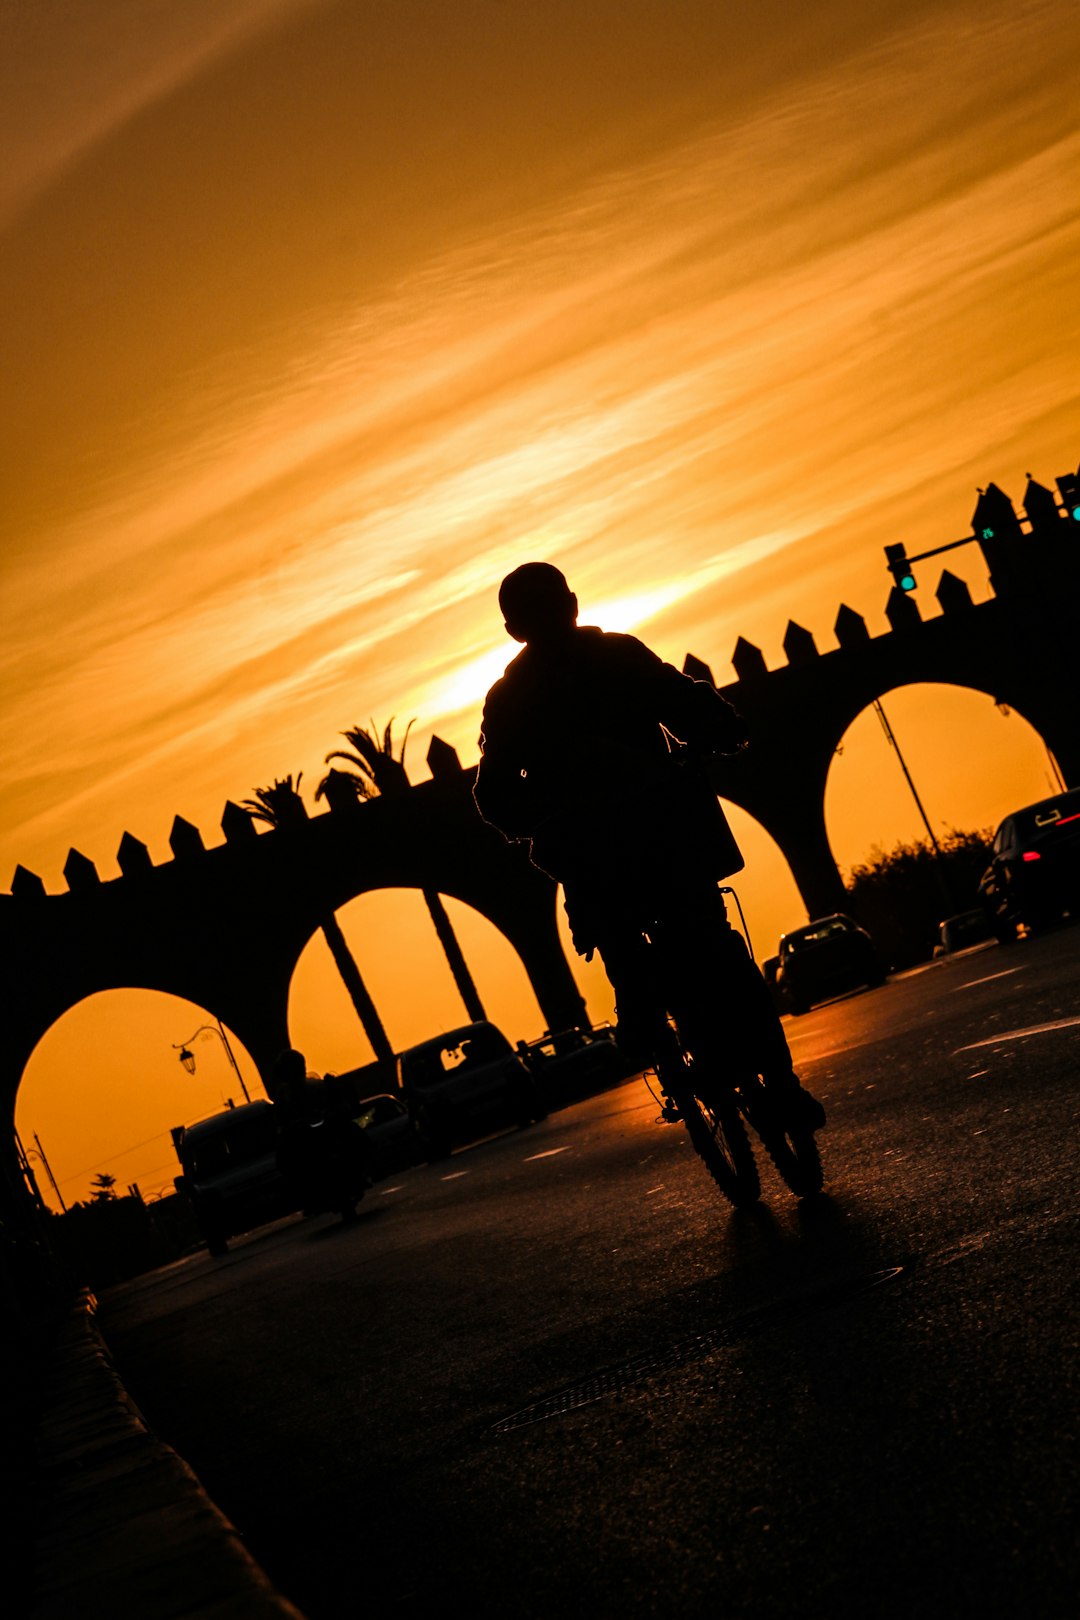 silhouette of man riding bicycle on road during sunset